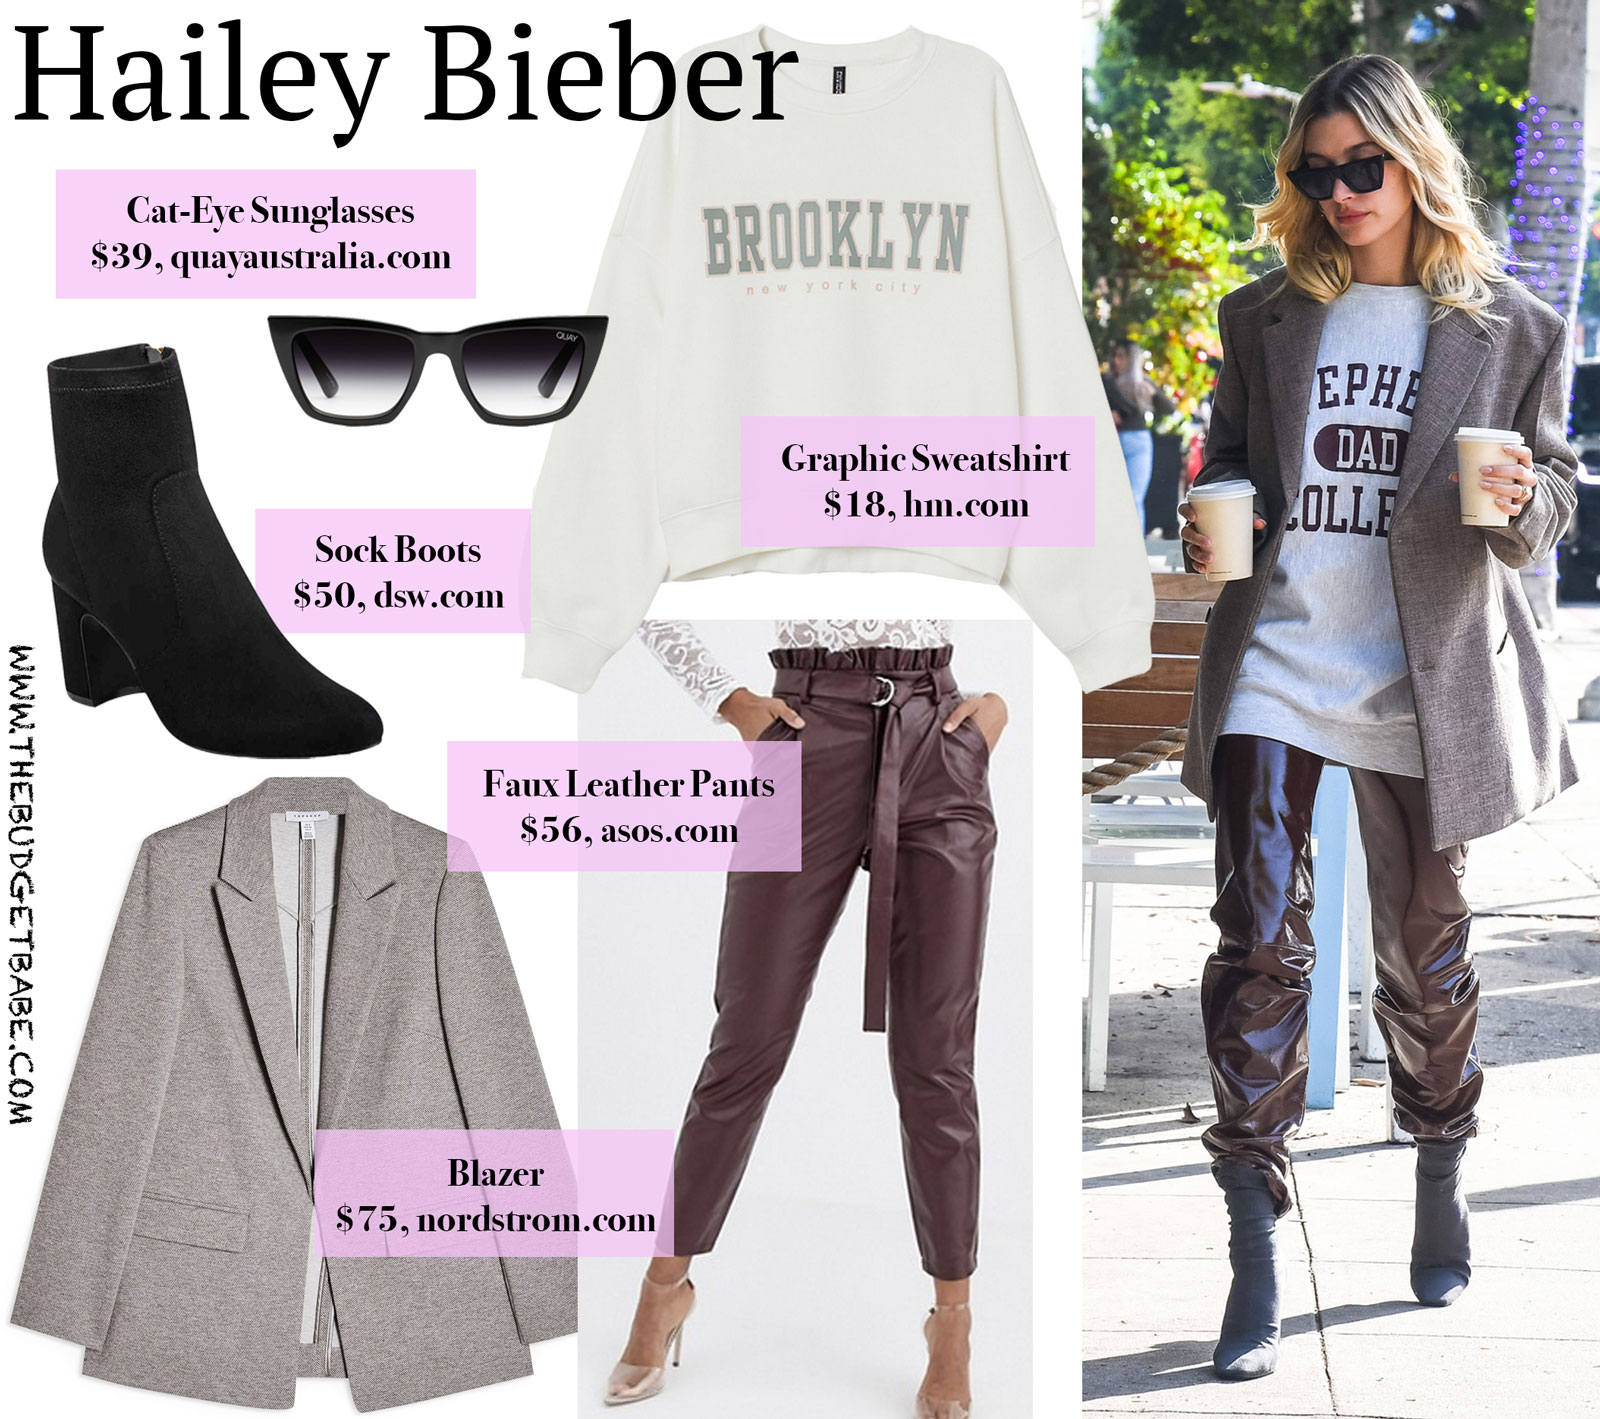 Hailey Bieber Graphic Sweatshirt Leather Pants Look for Less